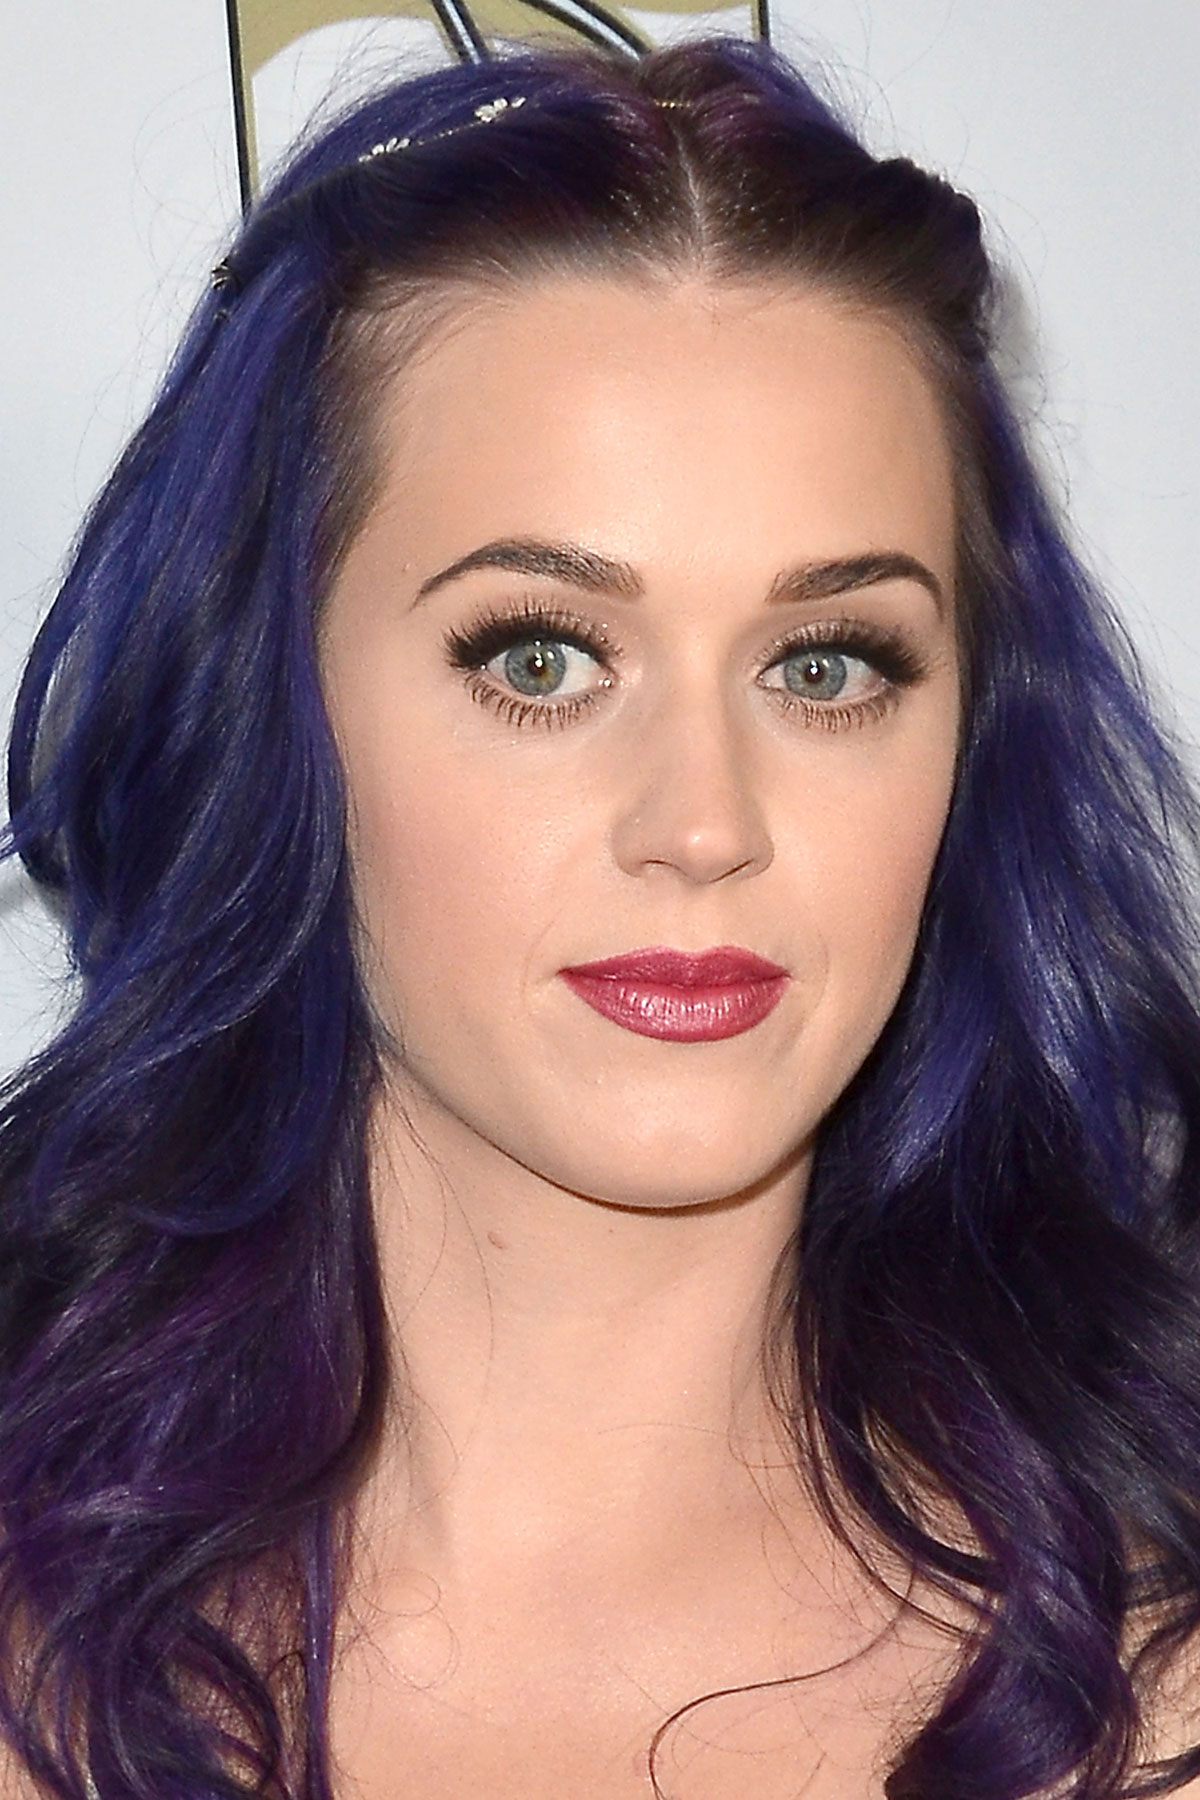 KATY PERRY at the 29th Annual ASCAP Pop Music Awards in Hollywood